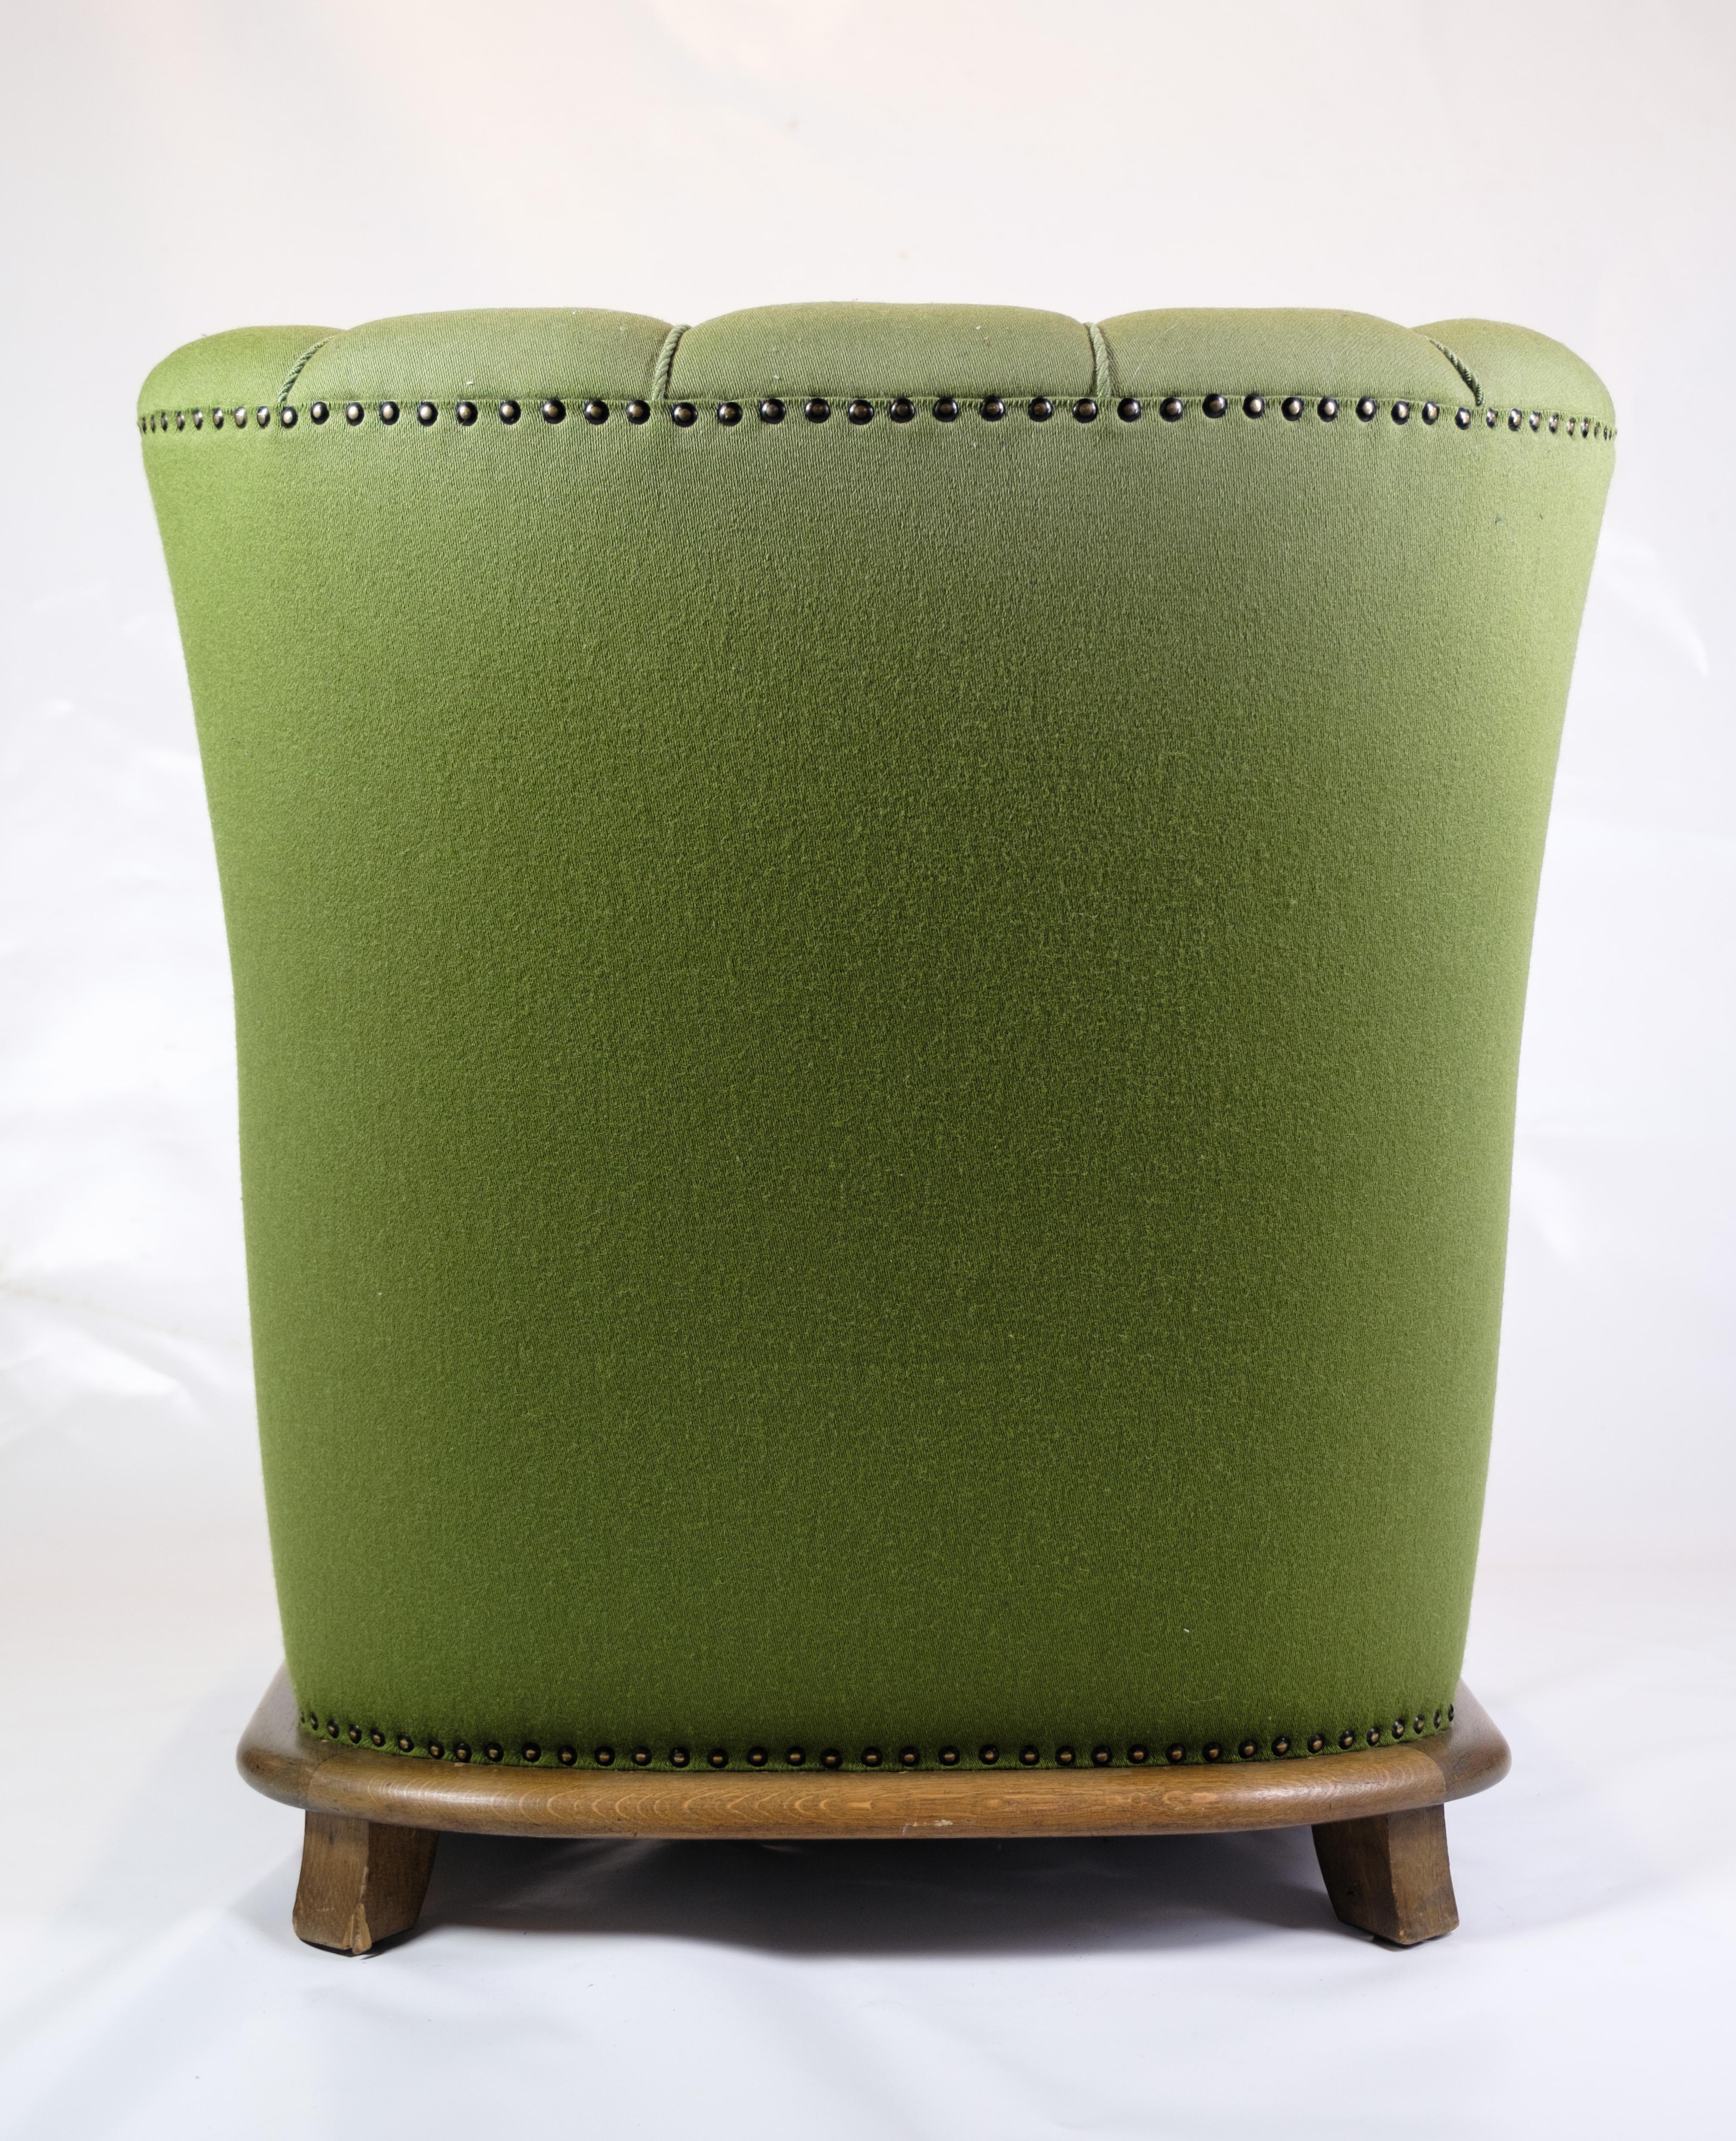 Renaissance Armchair in Green Fabric with Wood Carvings from 1920s. For Sale